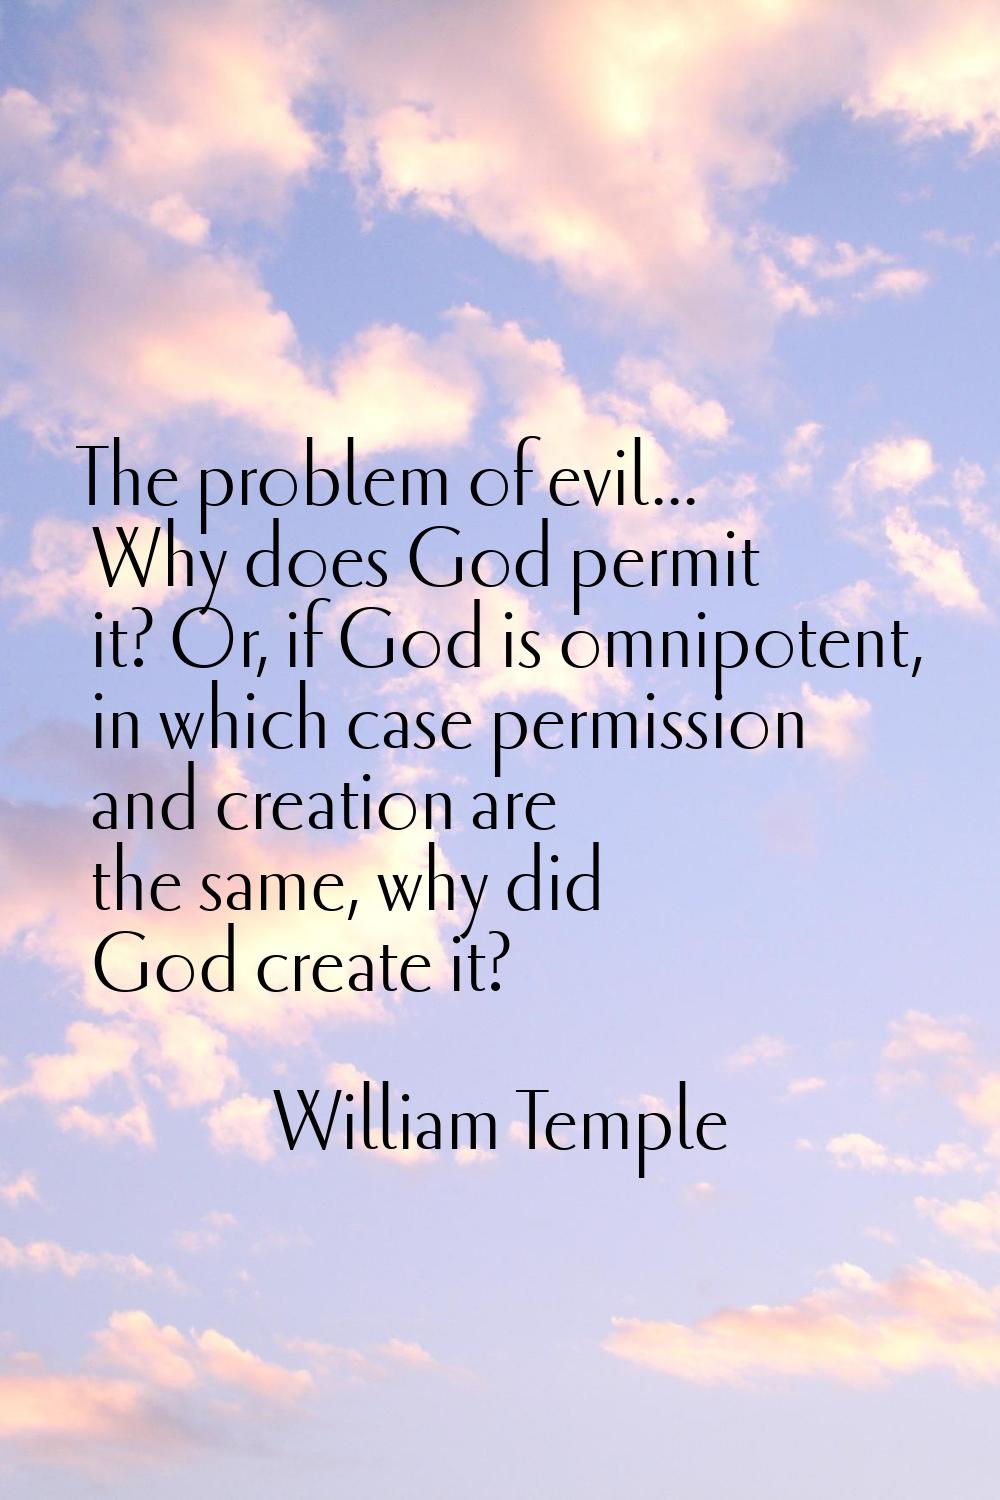 The problem of evil... Why does God permit it? Or, if God is omnipotent, in which case permission a